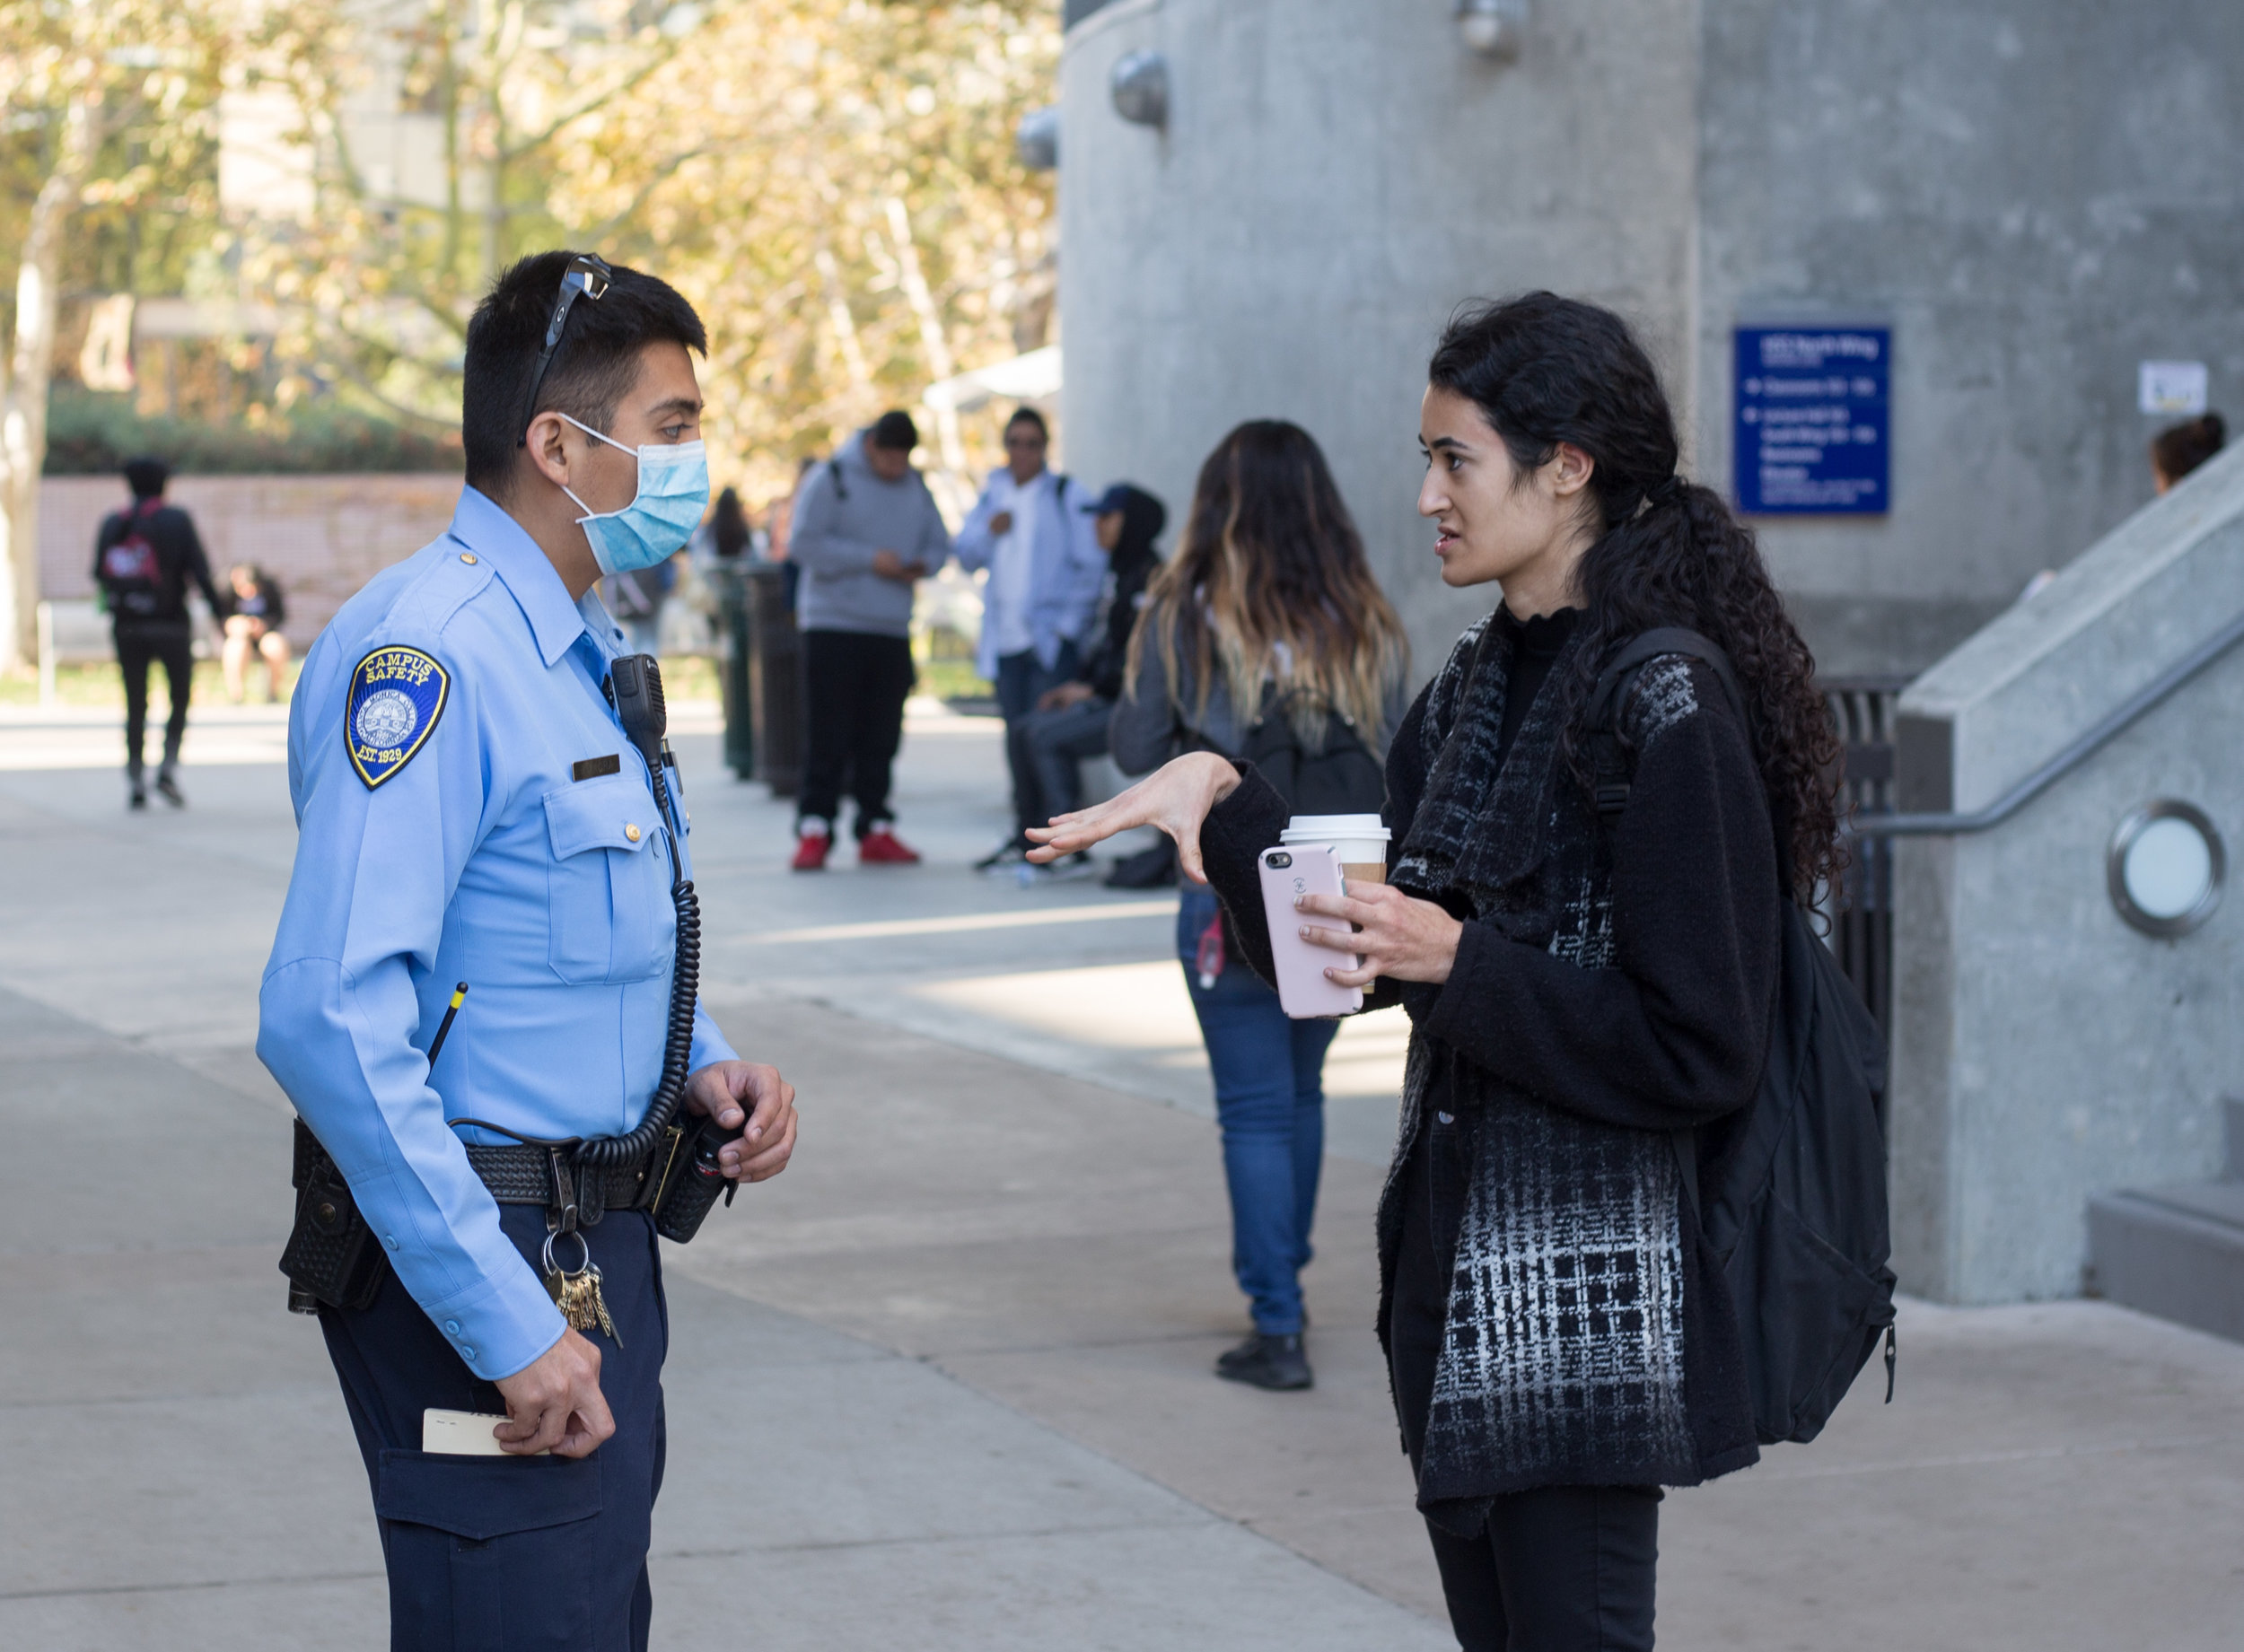  A Santa Monica Student (right) asks Campus Safety Officer Zamora (left) about why all classes were canceled after an email was sent out at 8:49 am by SMC informing students that classes are canceled due to the close proximity to the Skirball fire on